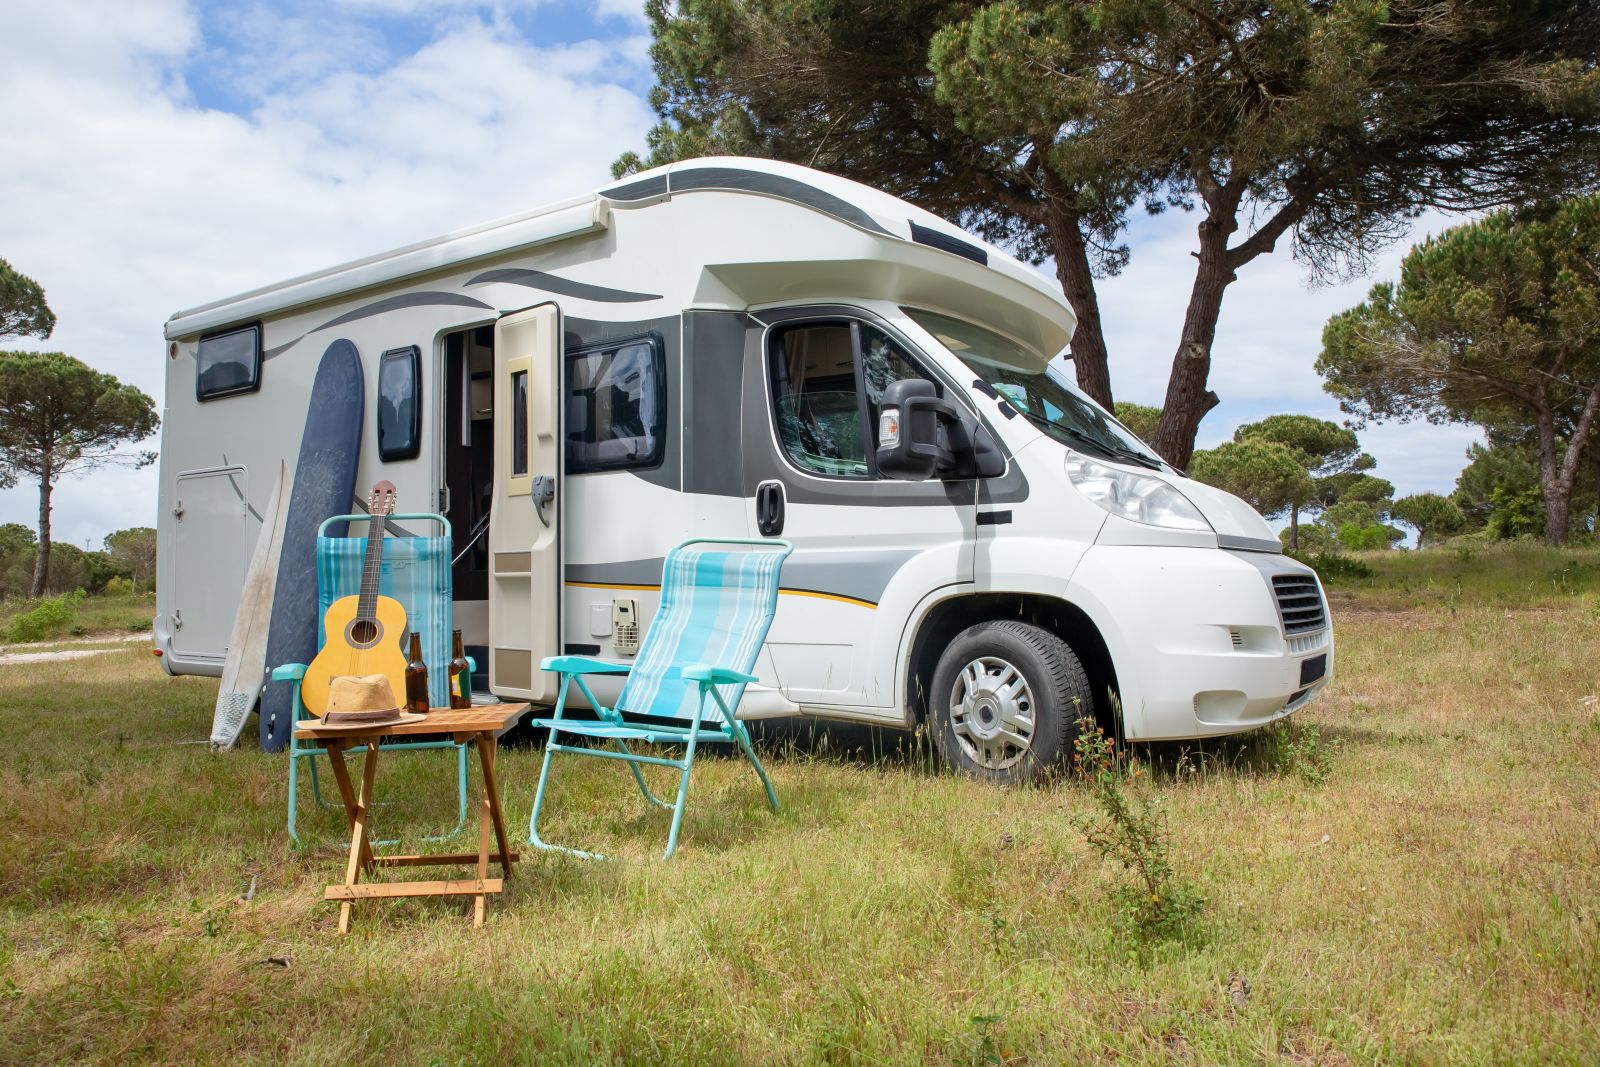 Quality motorhome hire in Scotland